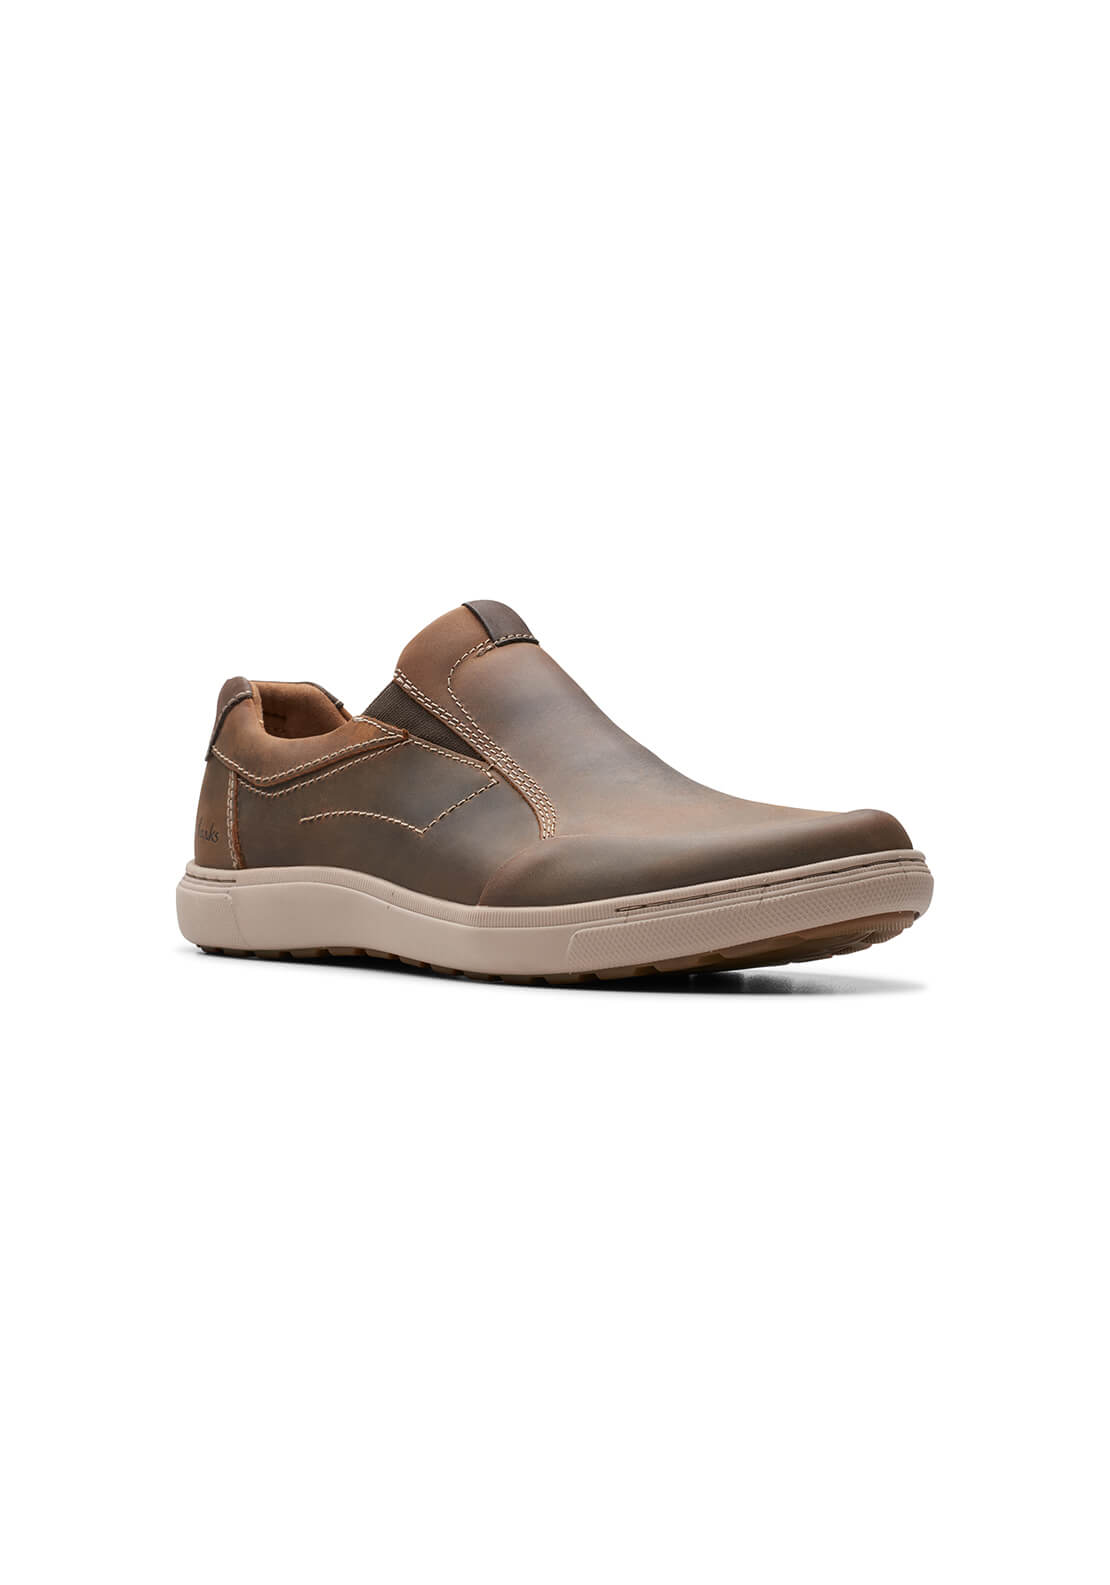 Clarks Mapstone Step Shoe 4 Shaws Department Stores